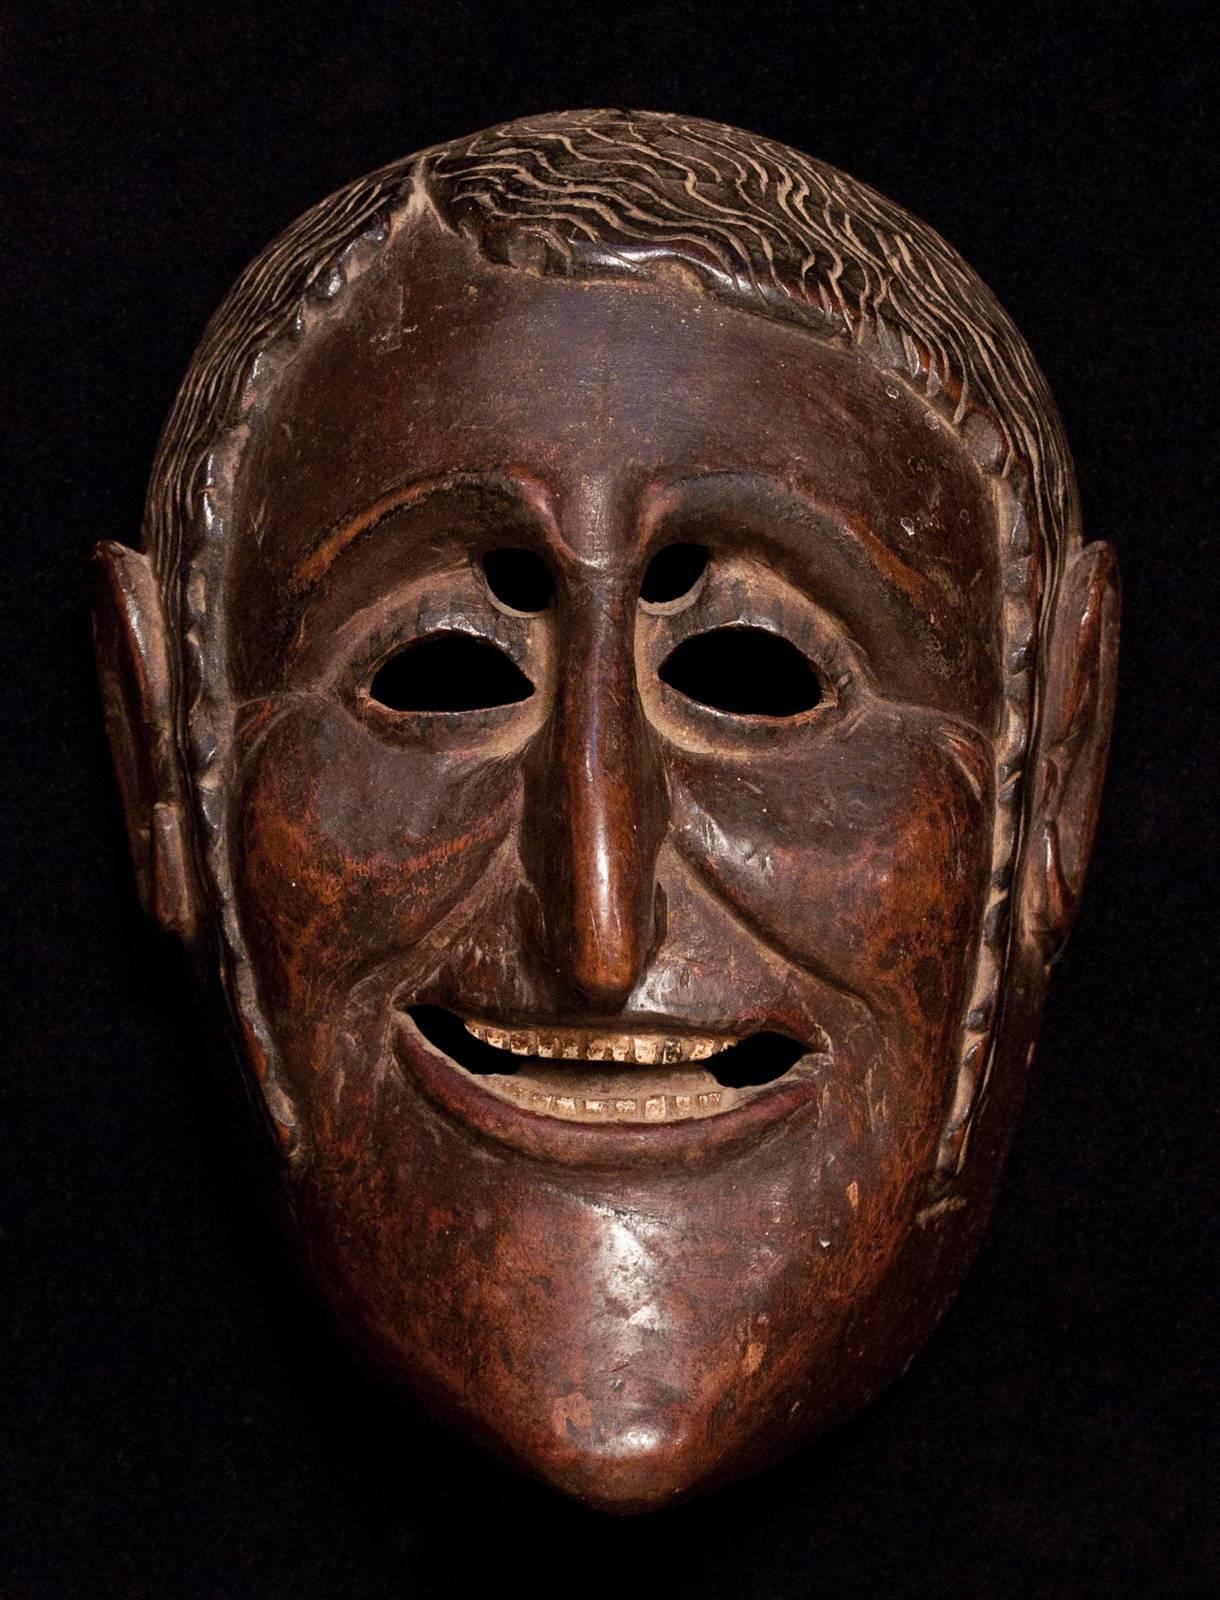 Offered by Zena Kruzick,
19th century conquistador dance mask from Guatemala.

Expressively carved from hardwood, the eyebrows, eyelashes, hair and upper lip show remnants of black paint, while the teeth have traces of white. His wavy side-parted